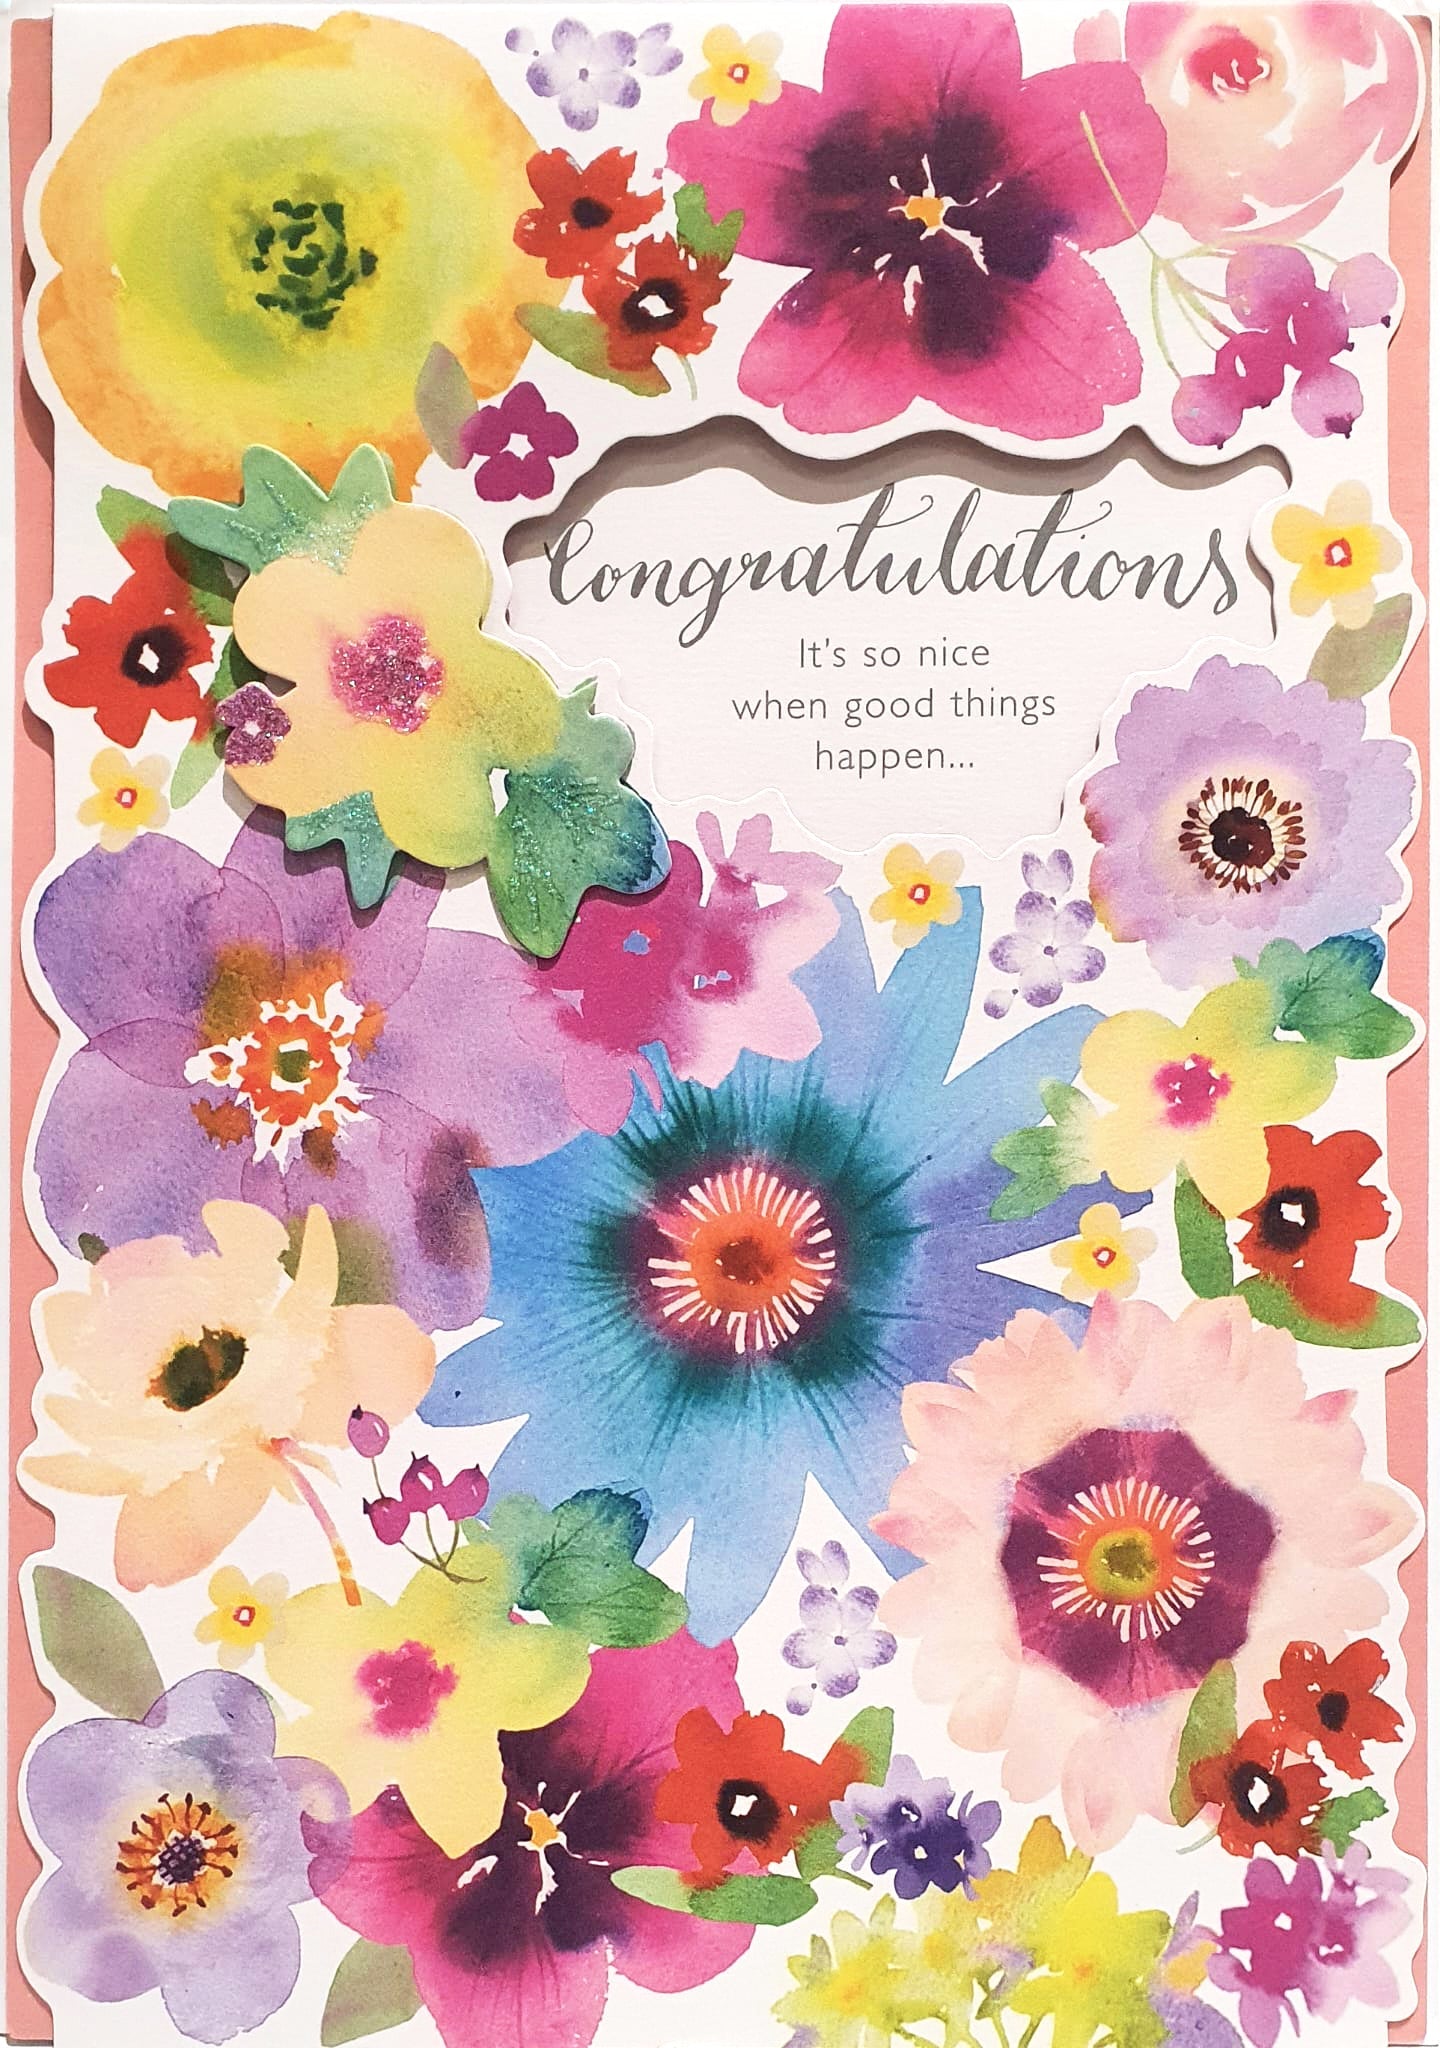 Congratulations Card - Blooming Flowers Of Celebration